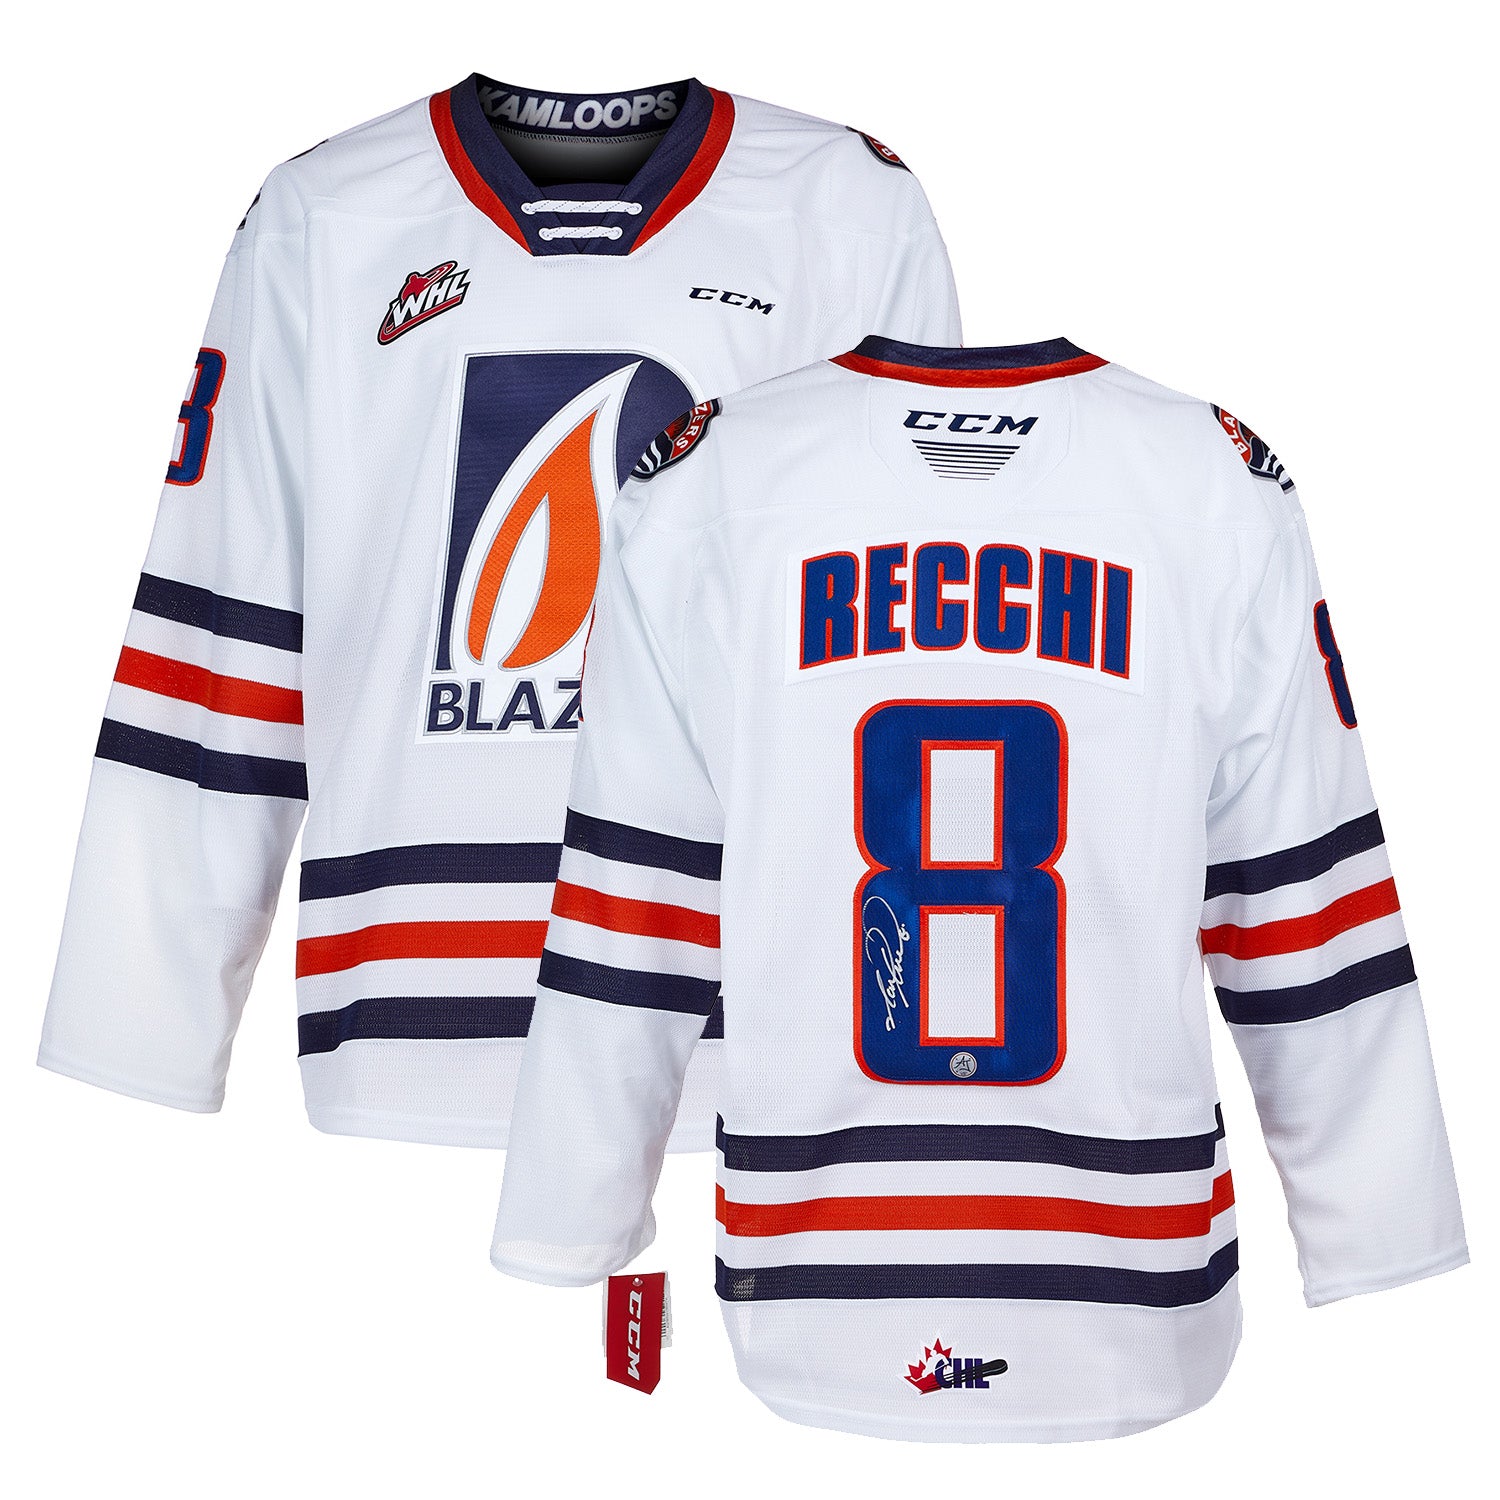 Mark Recchi Kamloops Blazers Signed White CHL Jersey